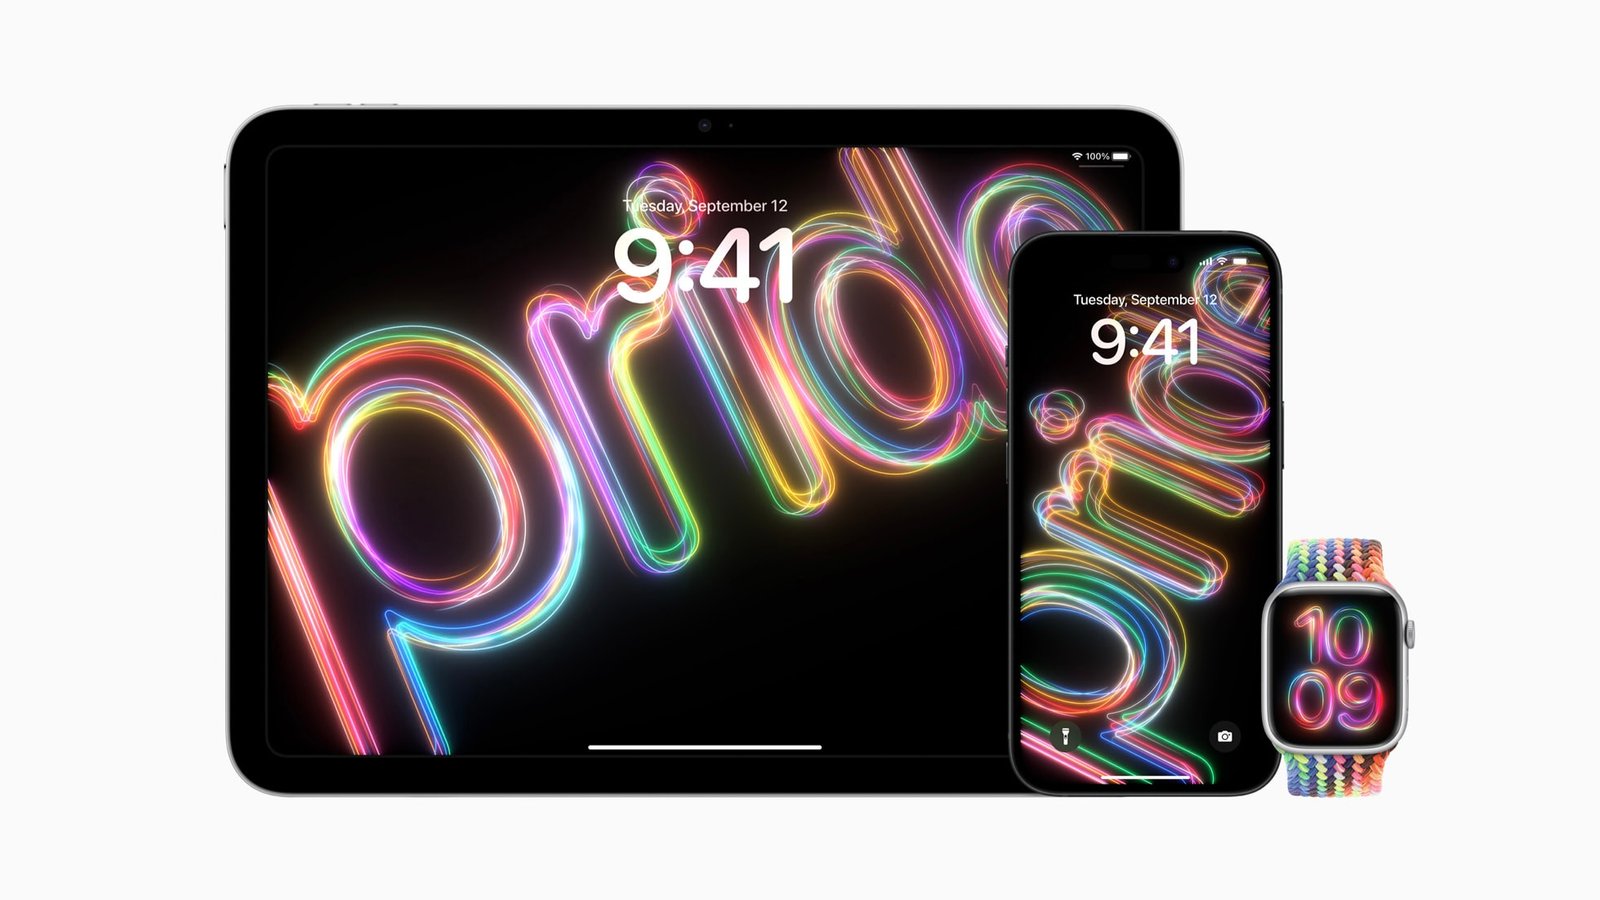 Apple’s new LGBTQ+ Pride wallpaper and watch face have been revealed